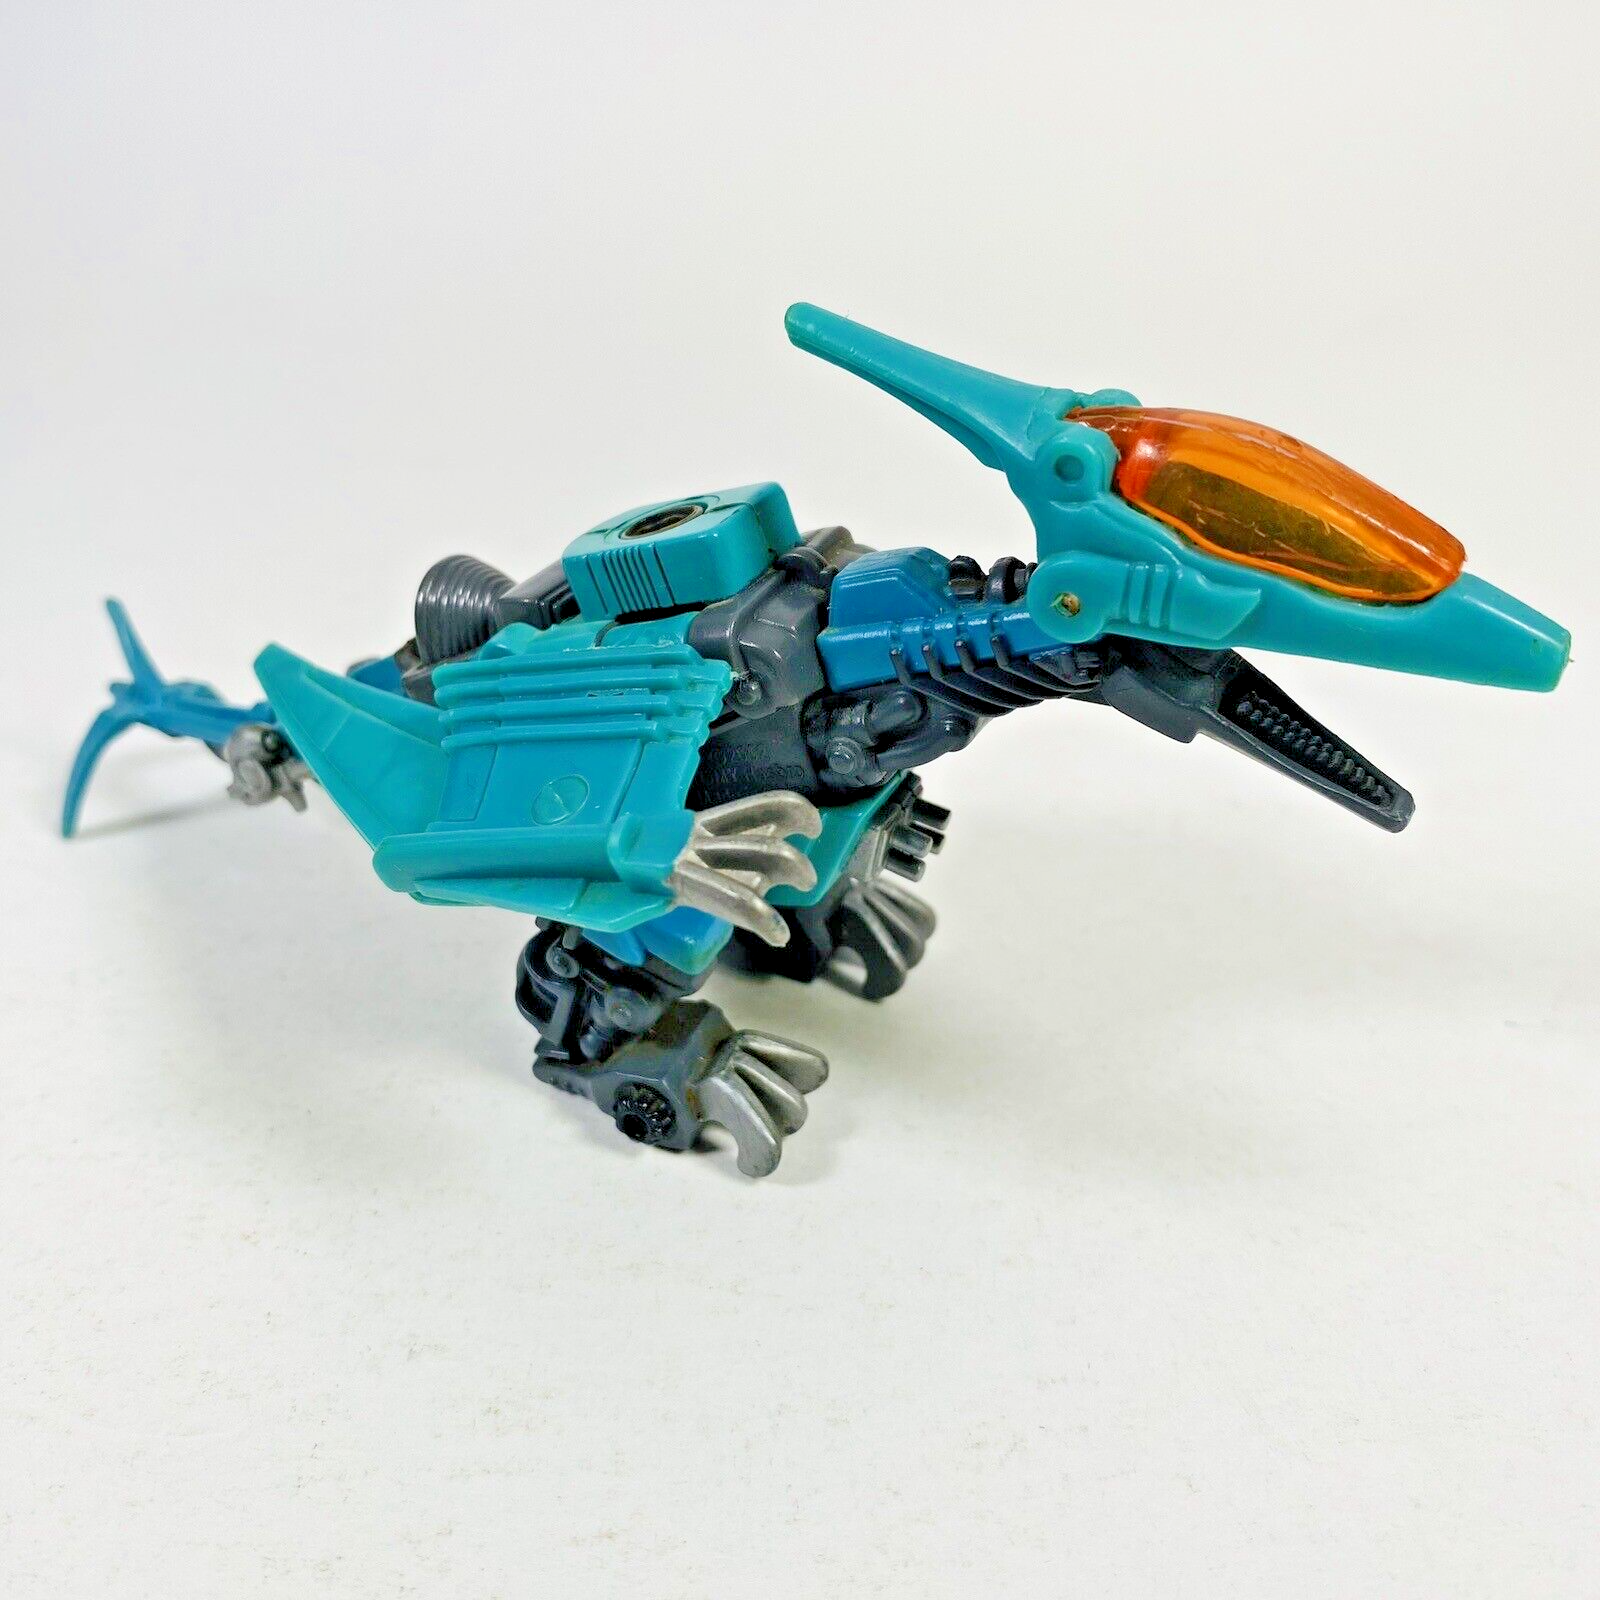 Zoids Raynos Model Not Complete Hasbro Action Figure Vintage TOMY 2002 Toy Wing - $16.79